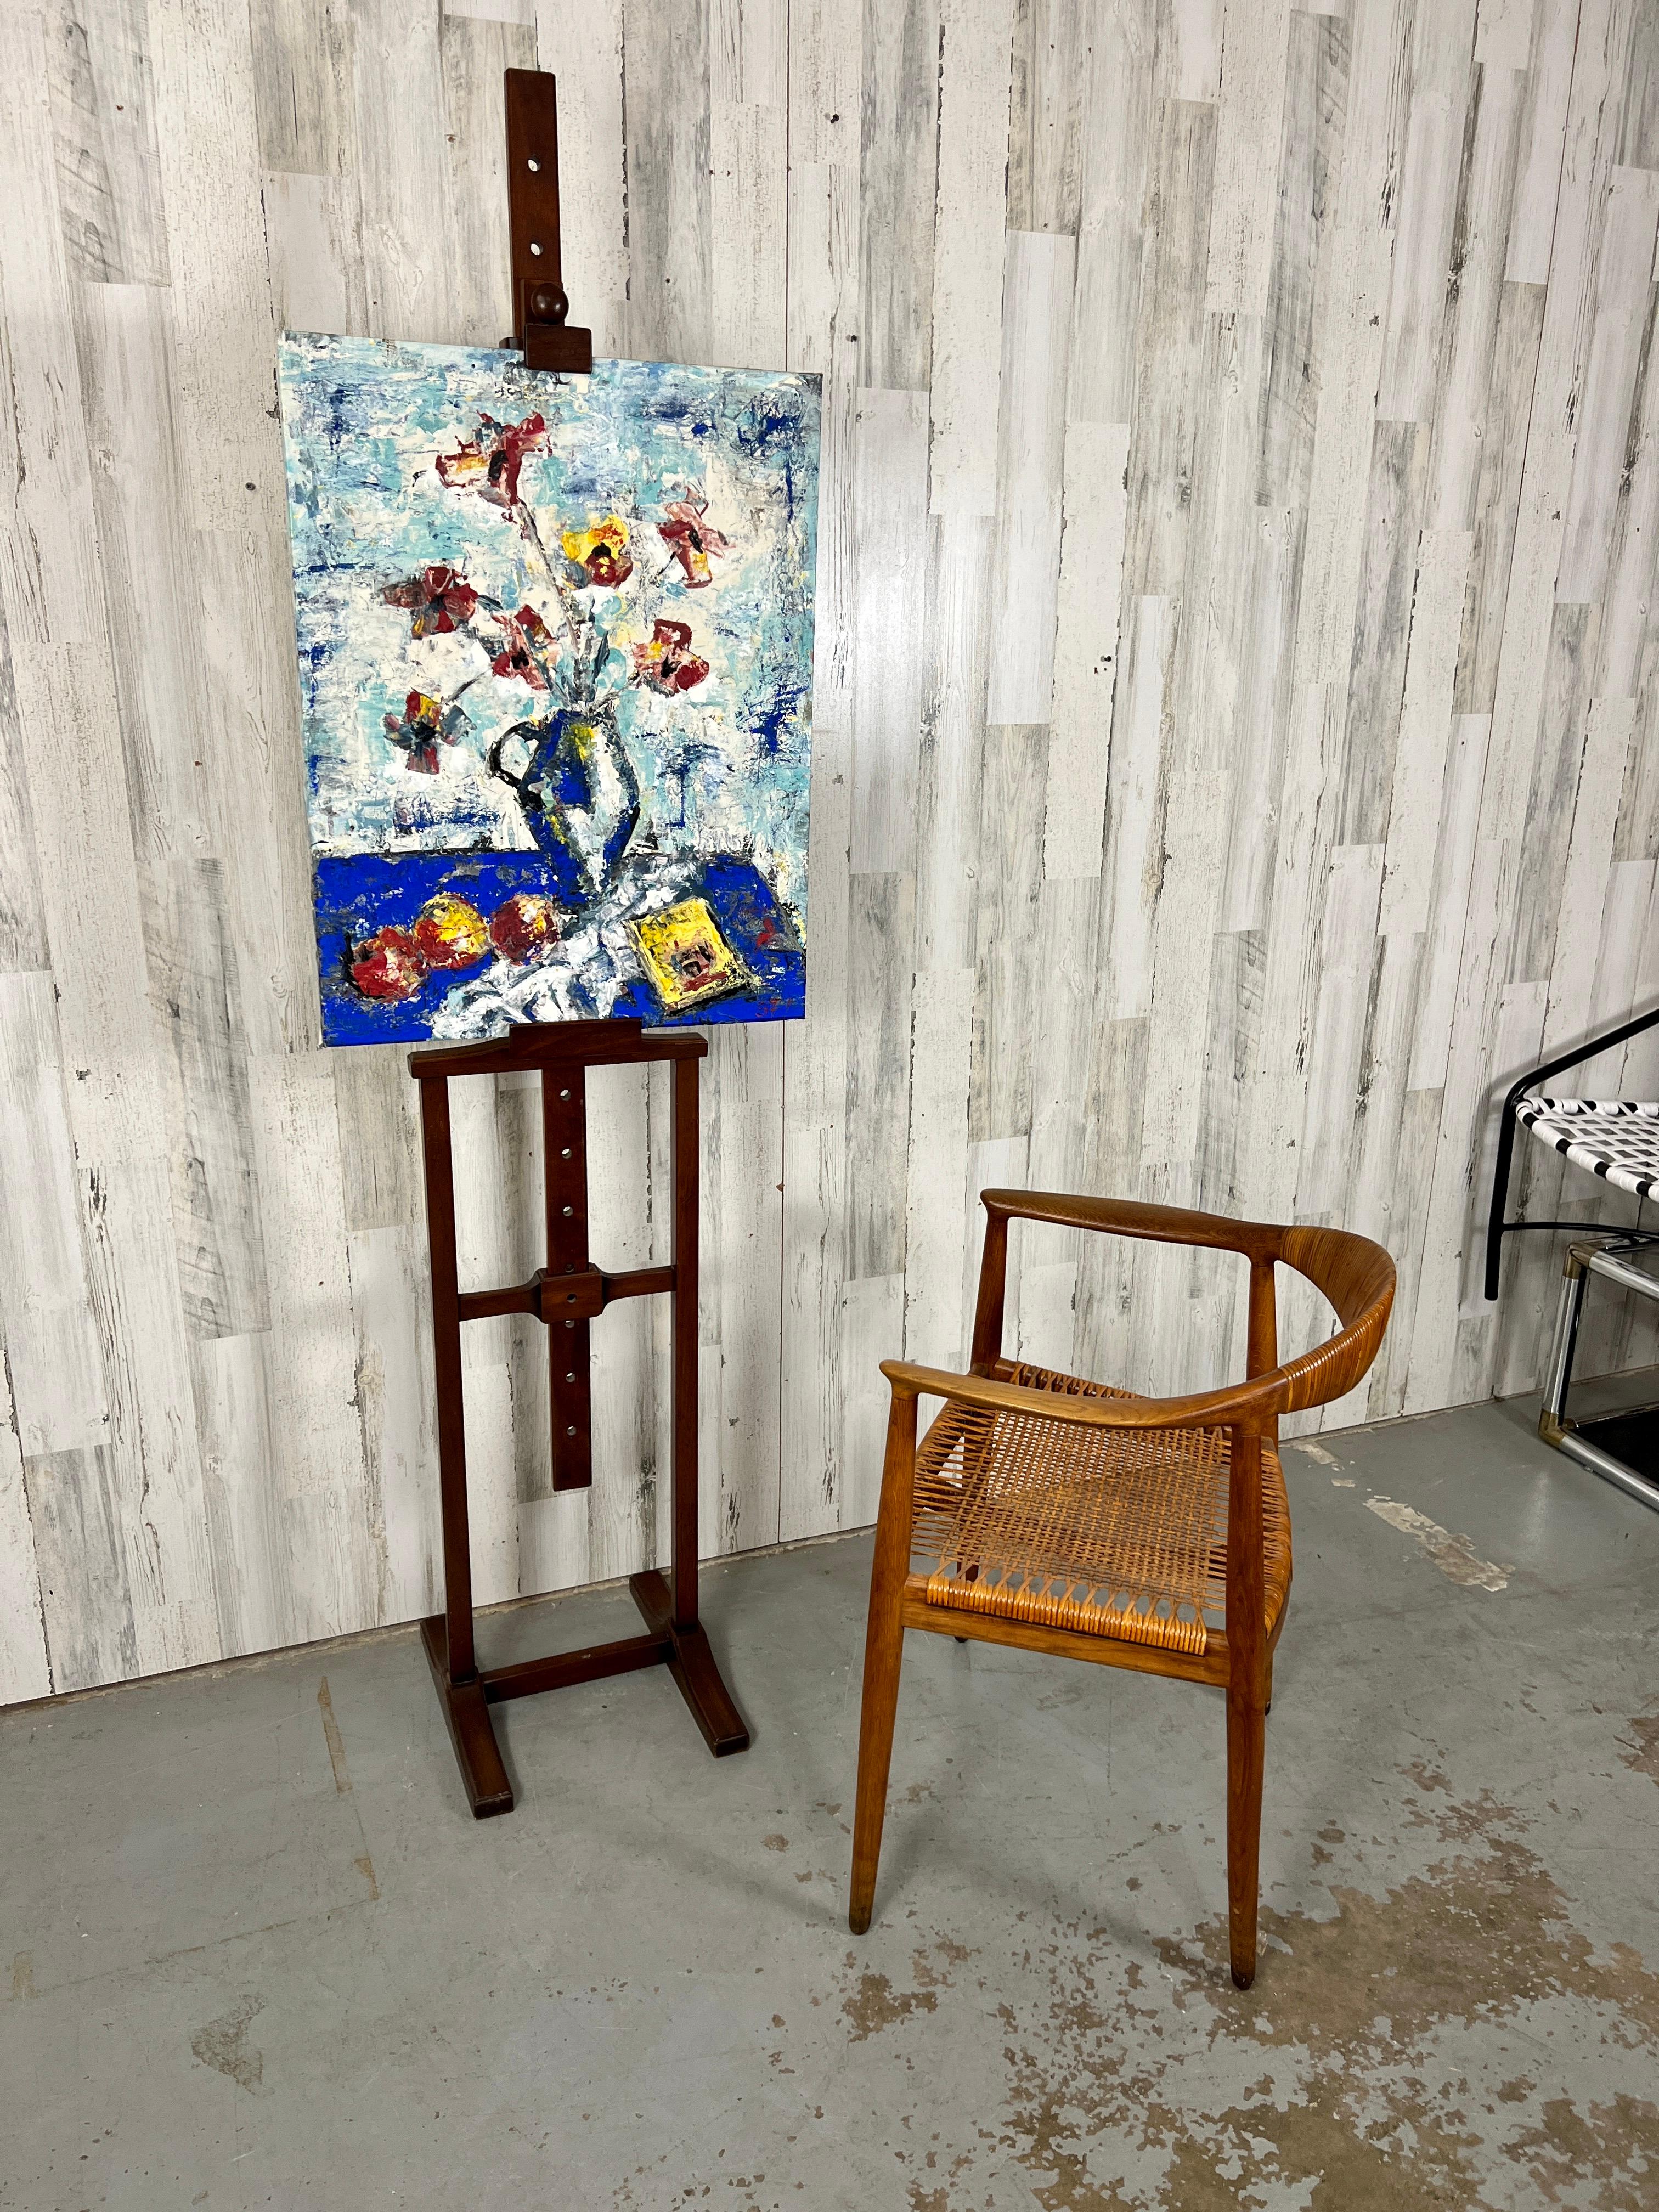 Solid mahogany easel great for display of any kind or art or decoration. Ajustable height for any size art.